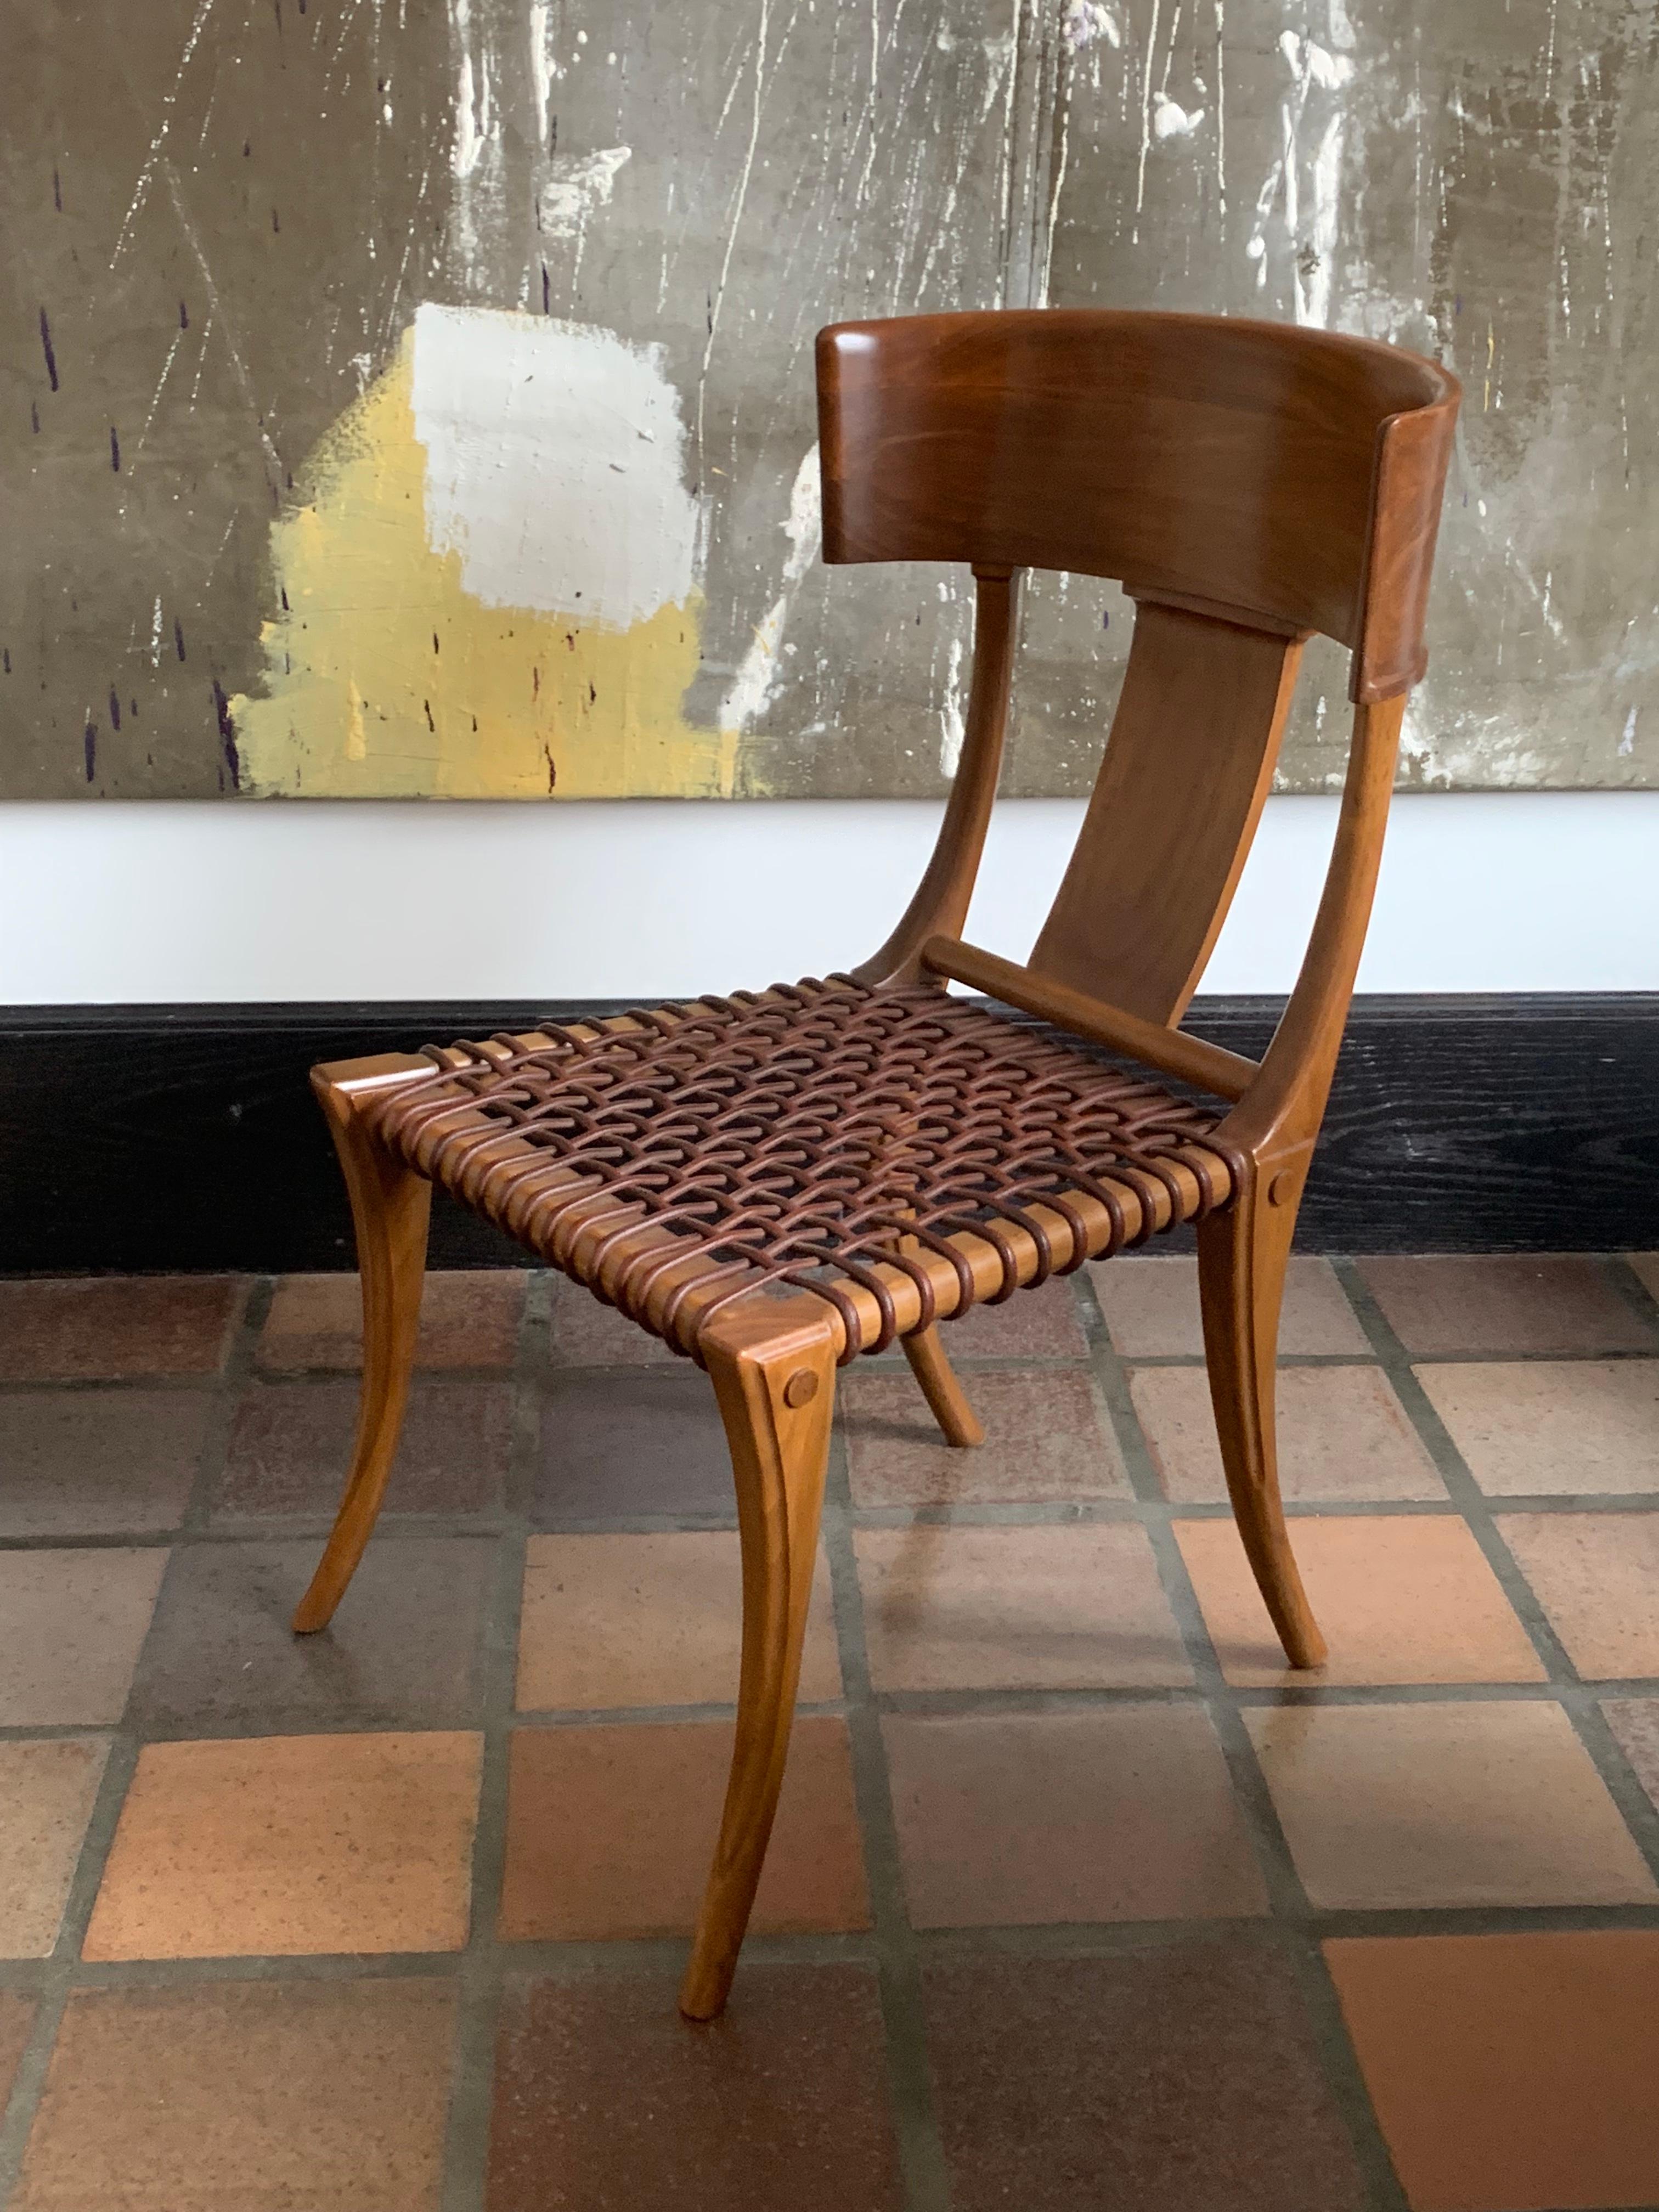 Single T.H. Robsjohn-Gibbings Klismos chair for Saridis of Athens, Greece in Greek walnut and leather woven seats. 

This chair was part of the collection he designed for Saridis of Athens in 1961, inspired by the drawings he saw on ancient Greek